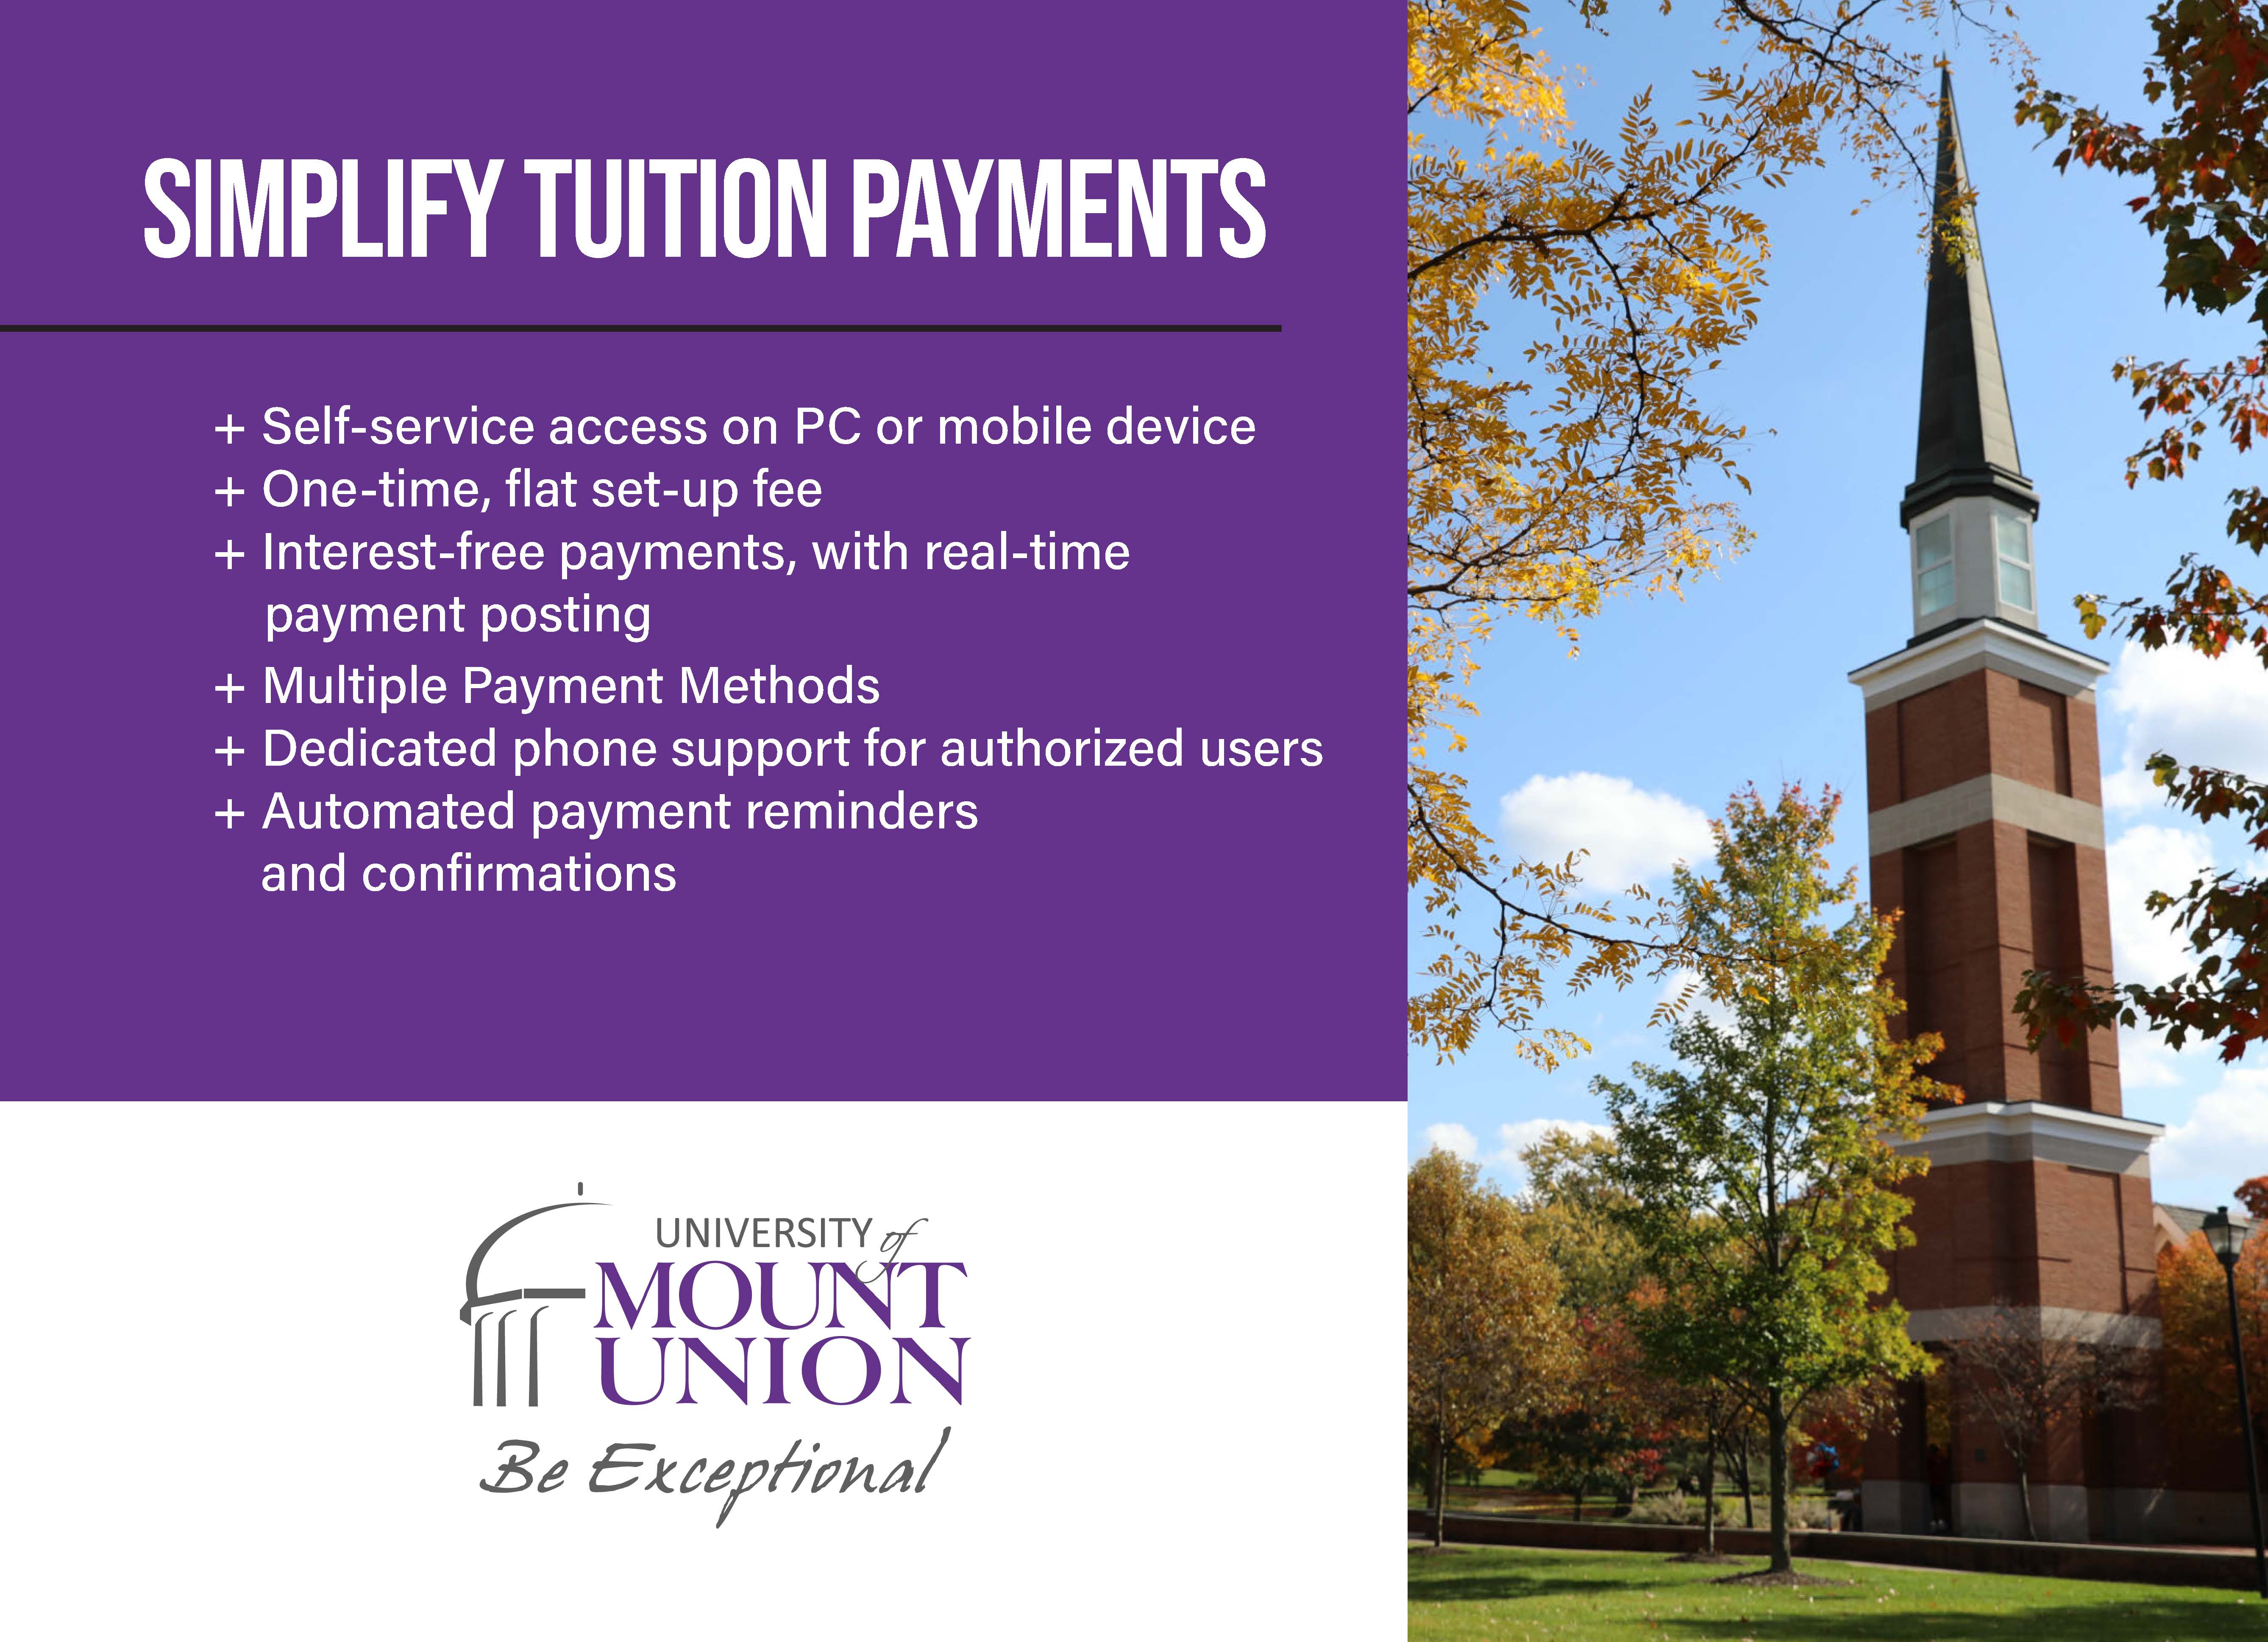 process to simplify tuition payments online